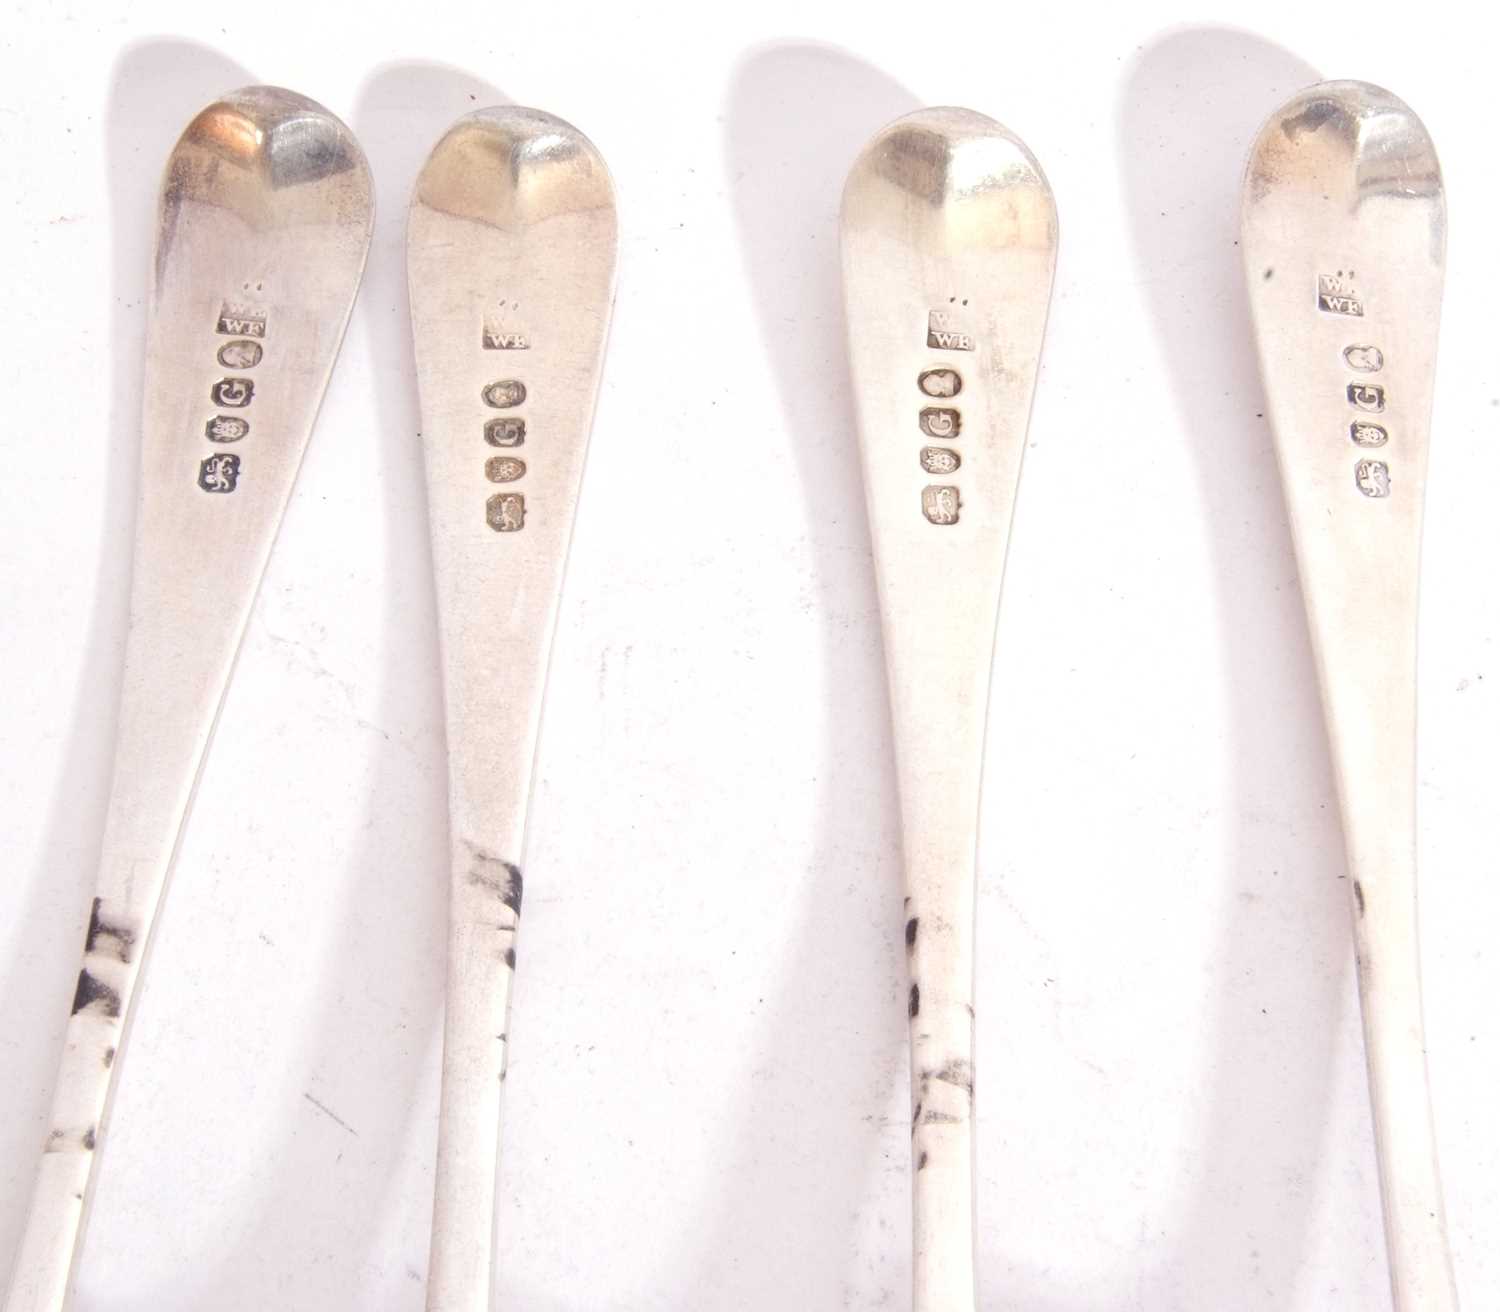 Set of four Georgian Old English table spoons engraved with family monogram, London 1802, maker's - Image 7 of 7